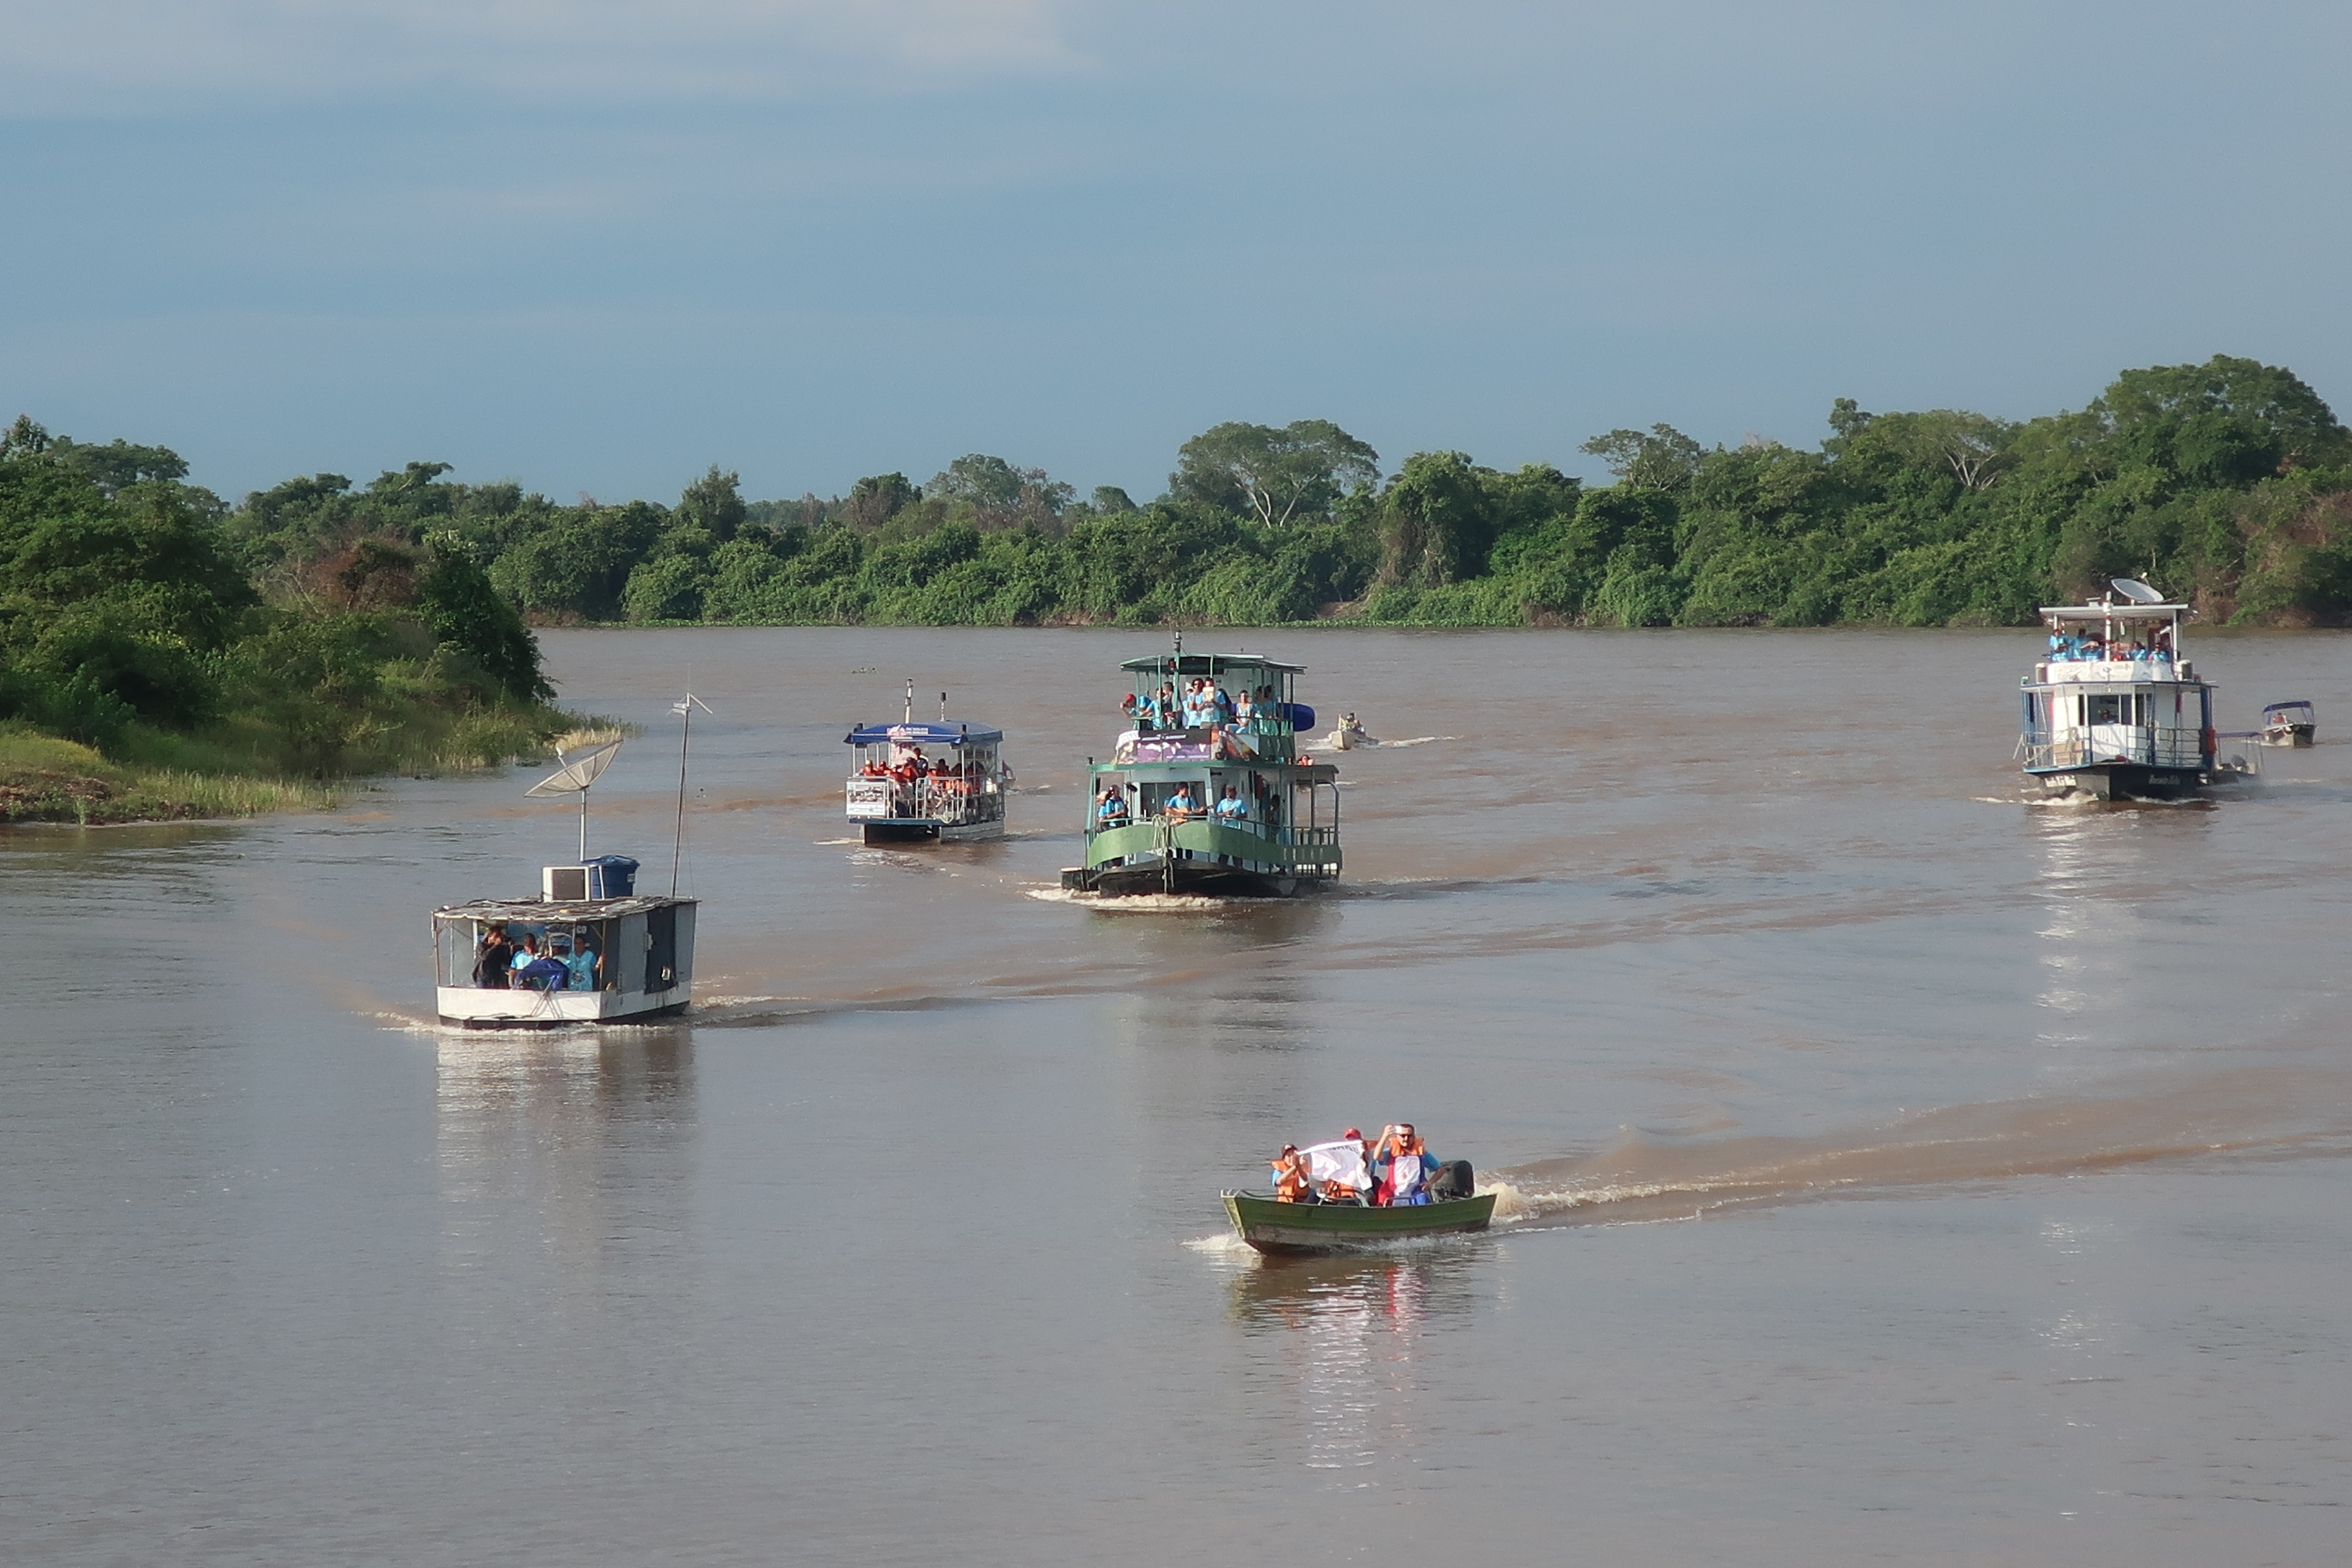 Every year on november 12th, communities around Caceres, Brazil celebrate the river on the Día do Río Paraguai